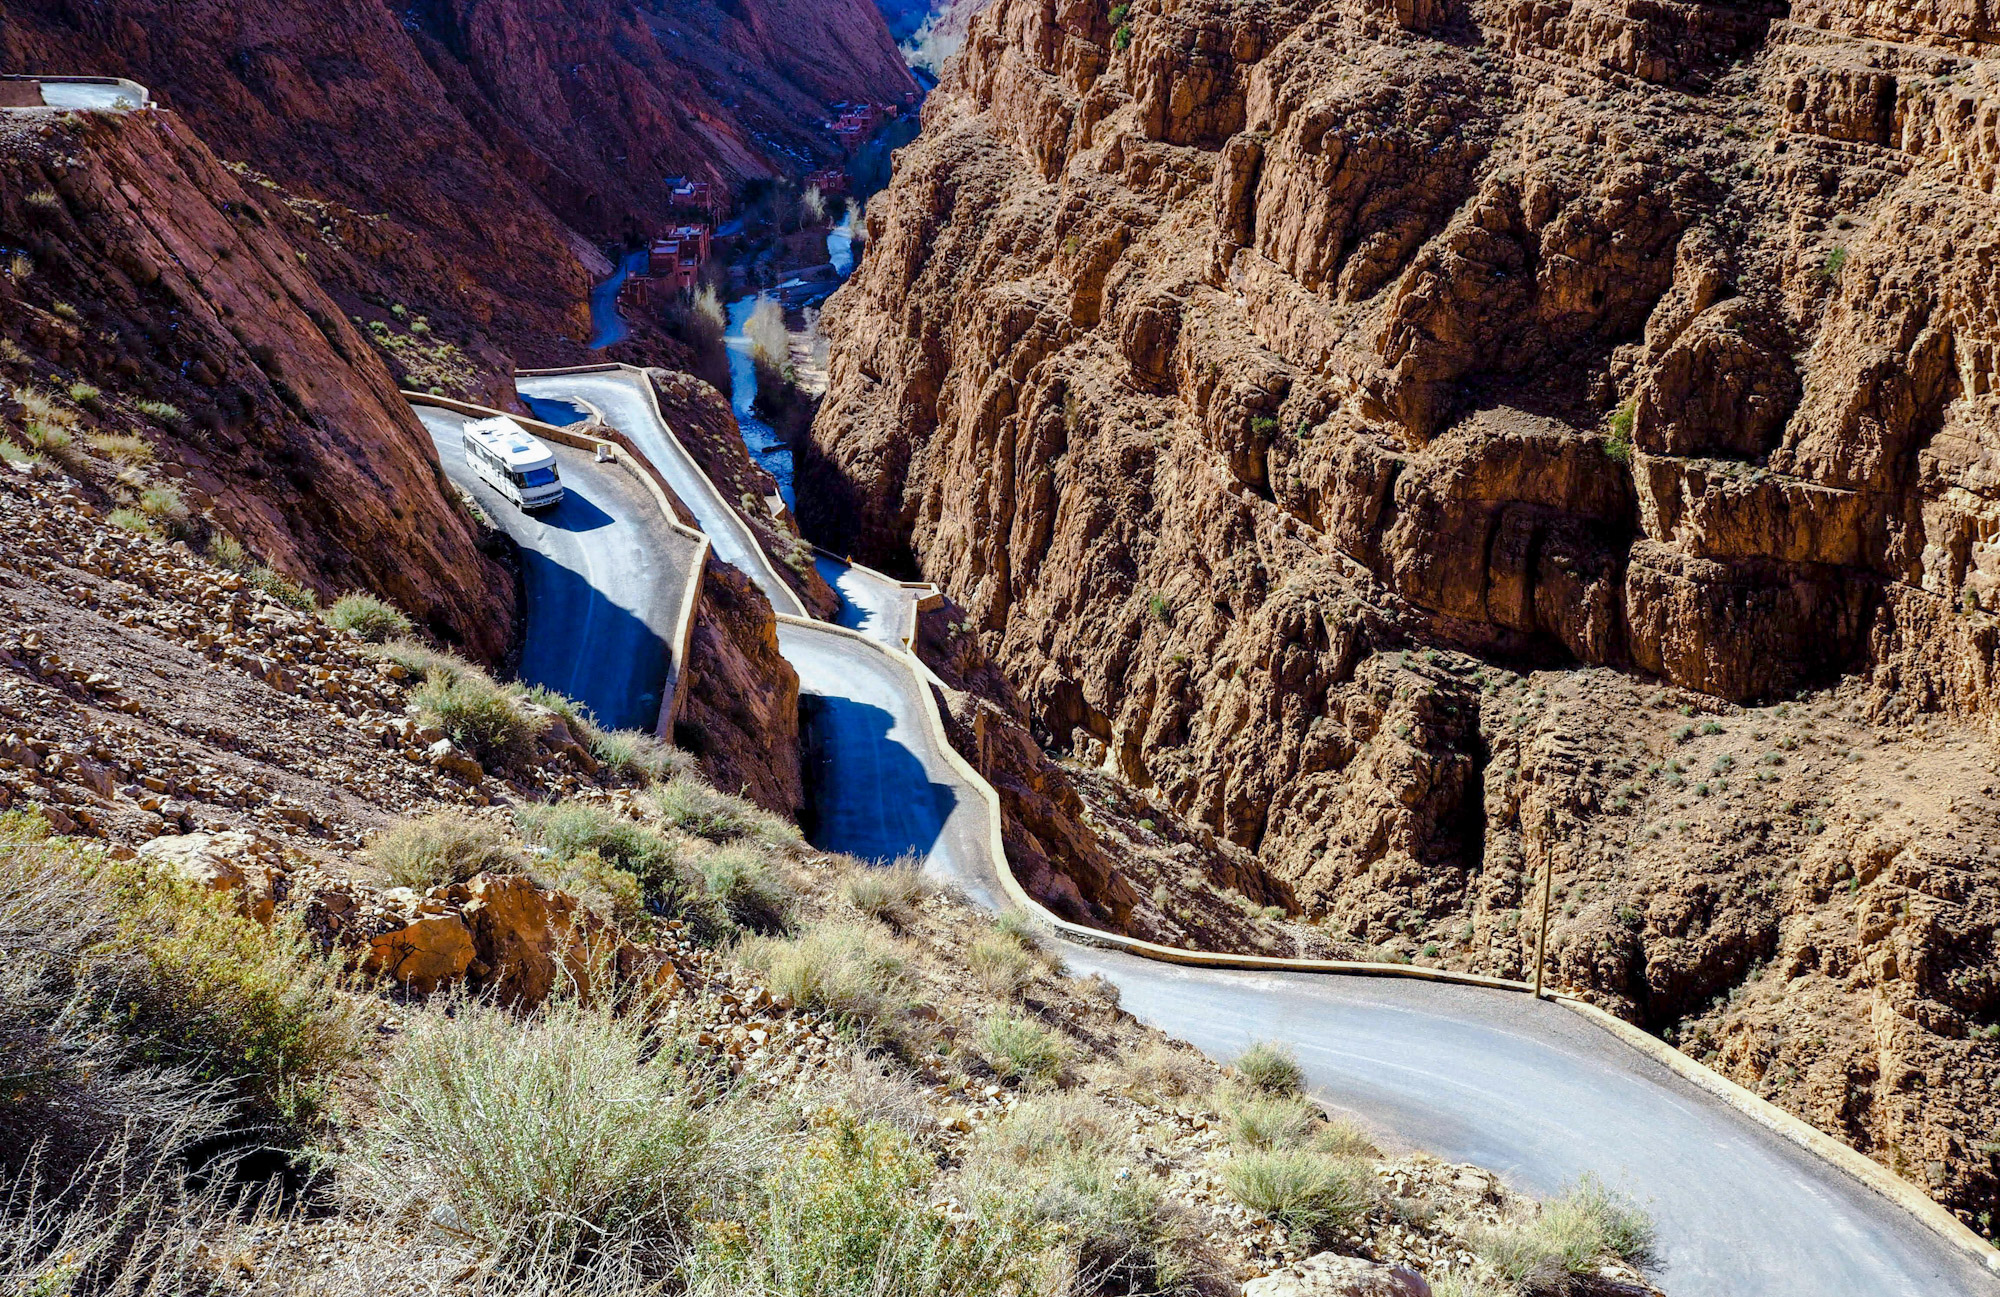 Classic Hymer motorhome descending hairpin bends down the mountain road through the Dades Gorge, Morocco